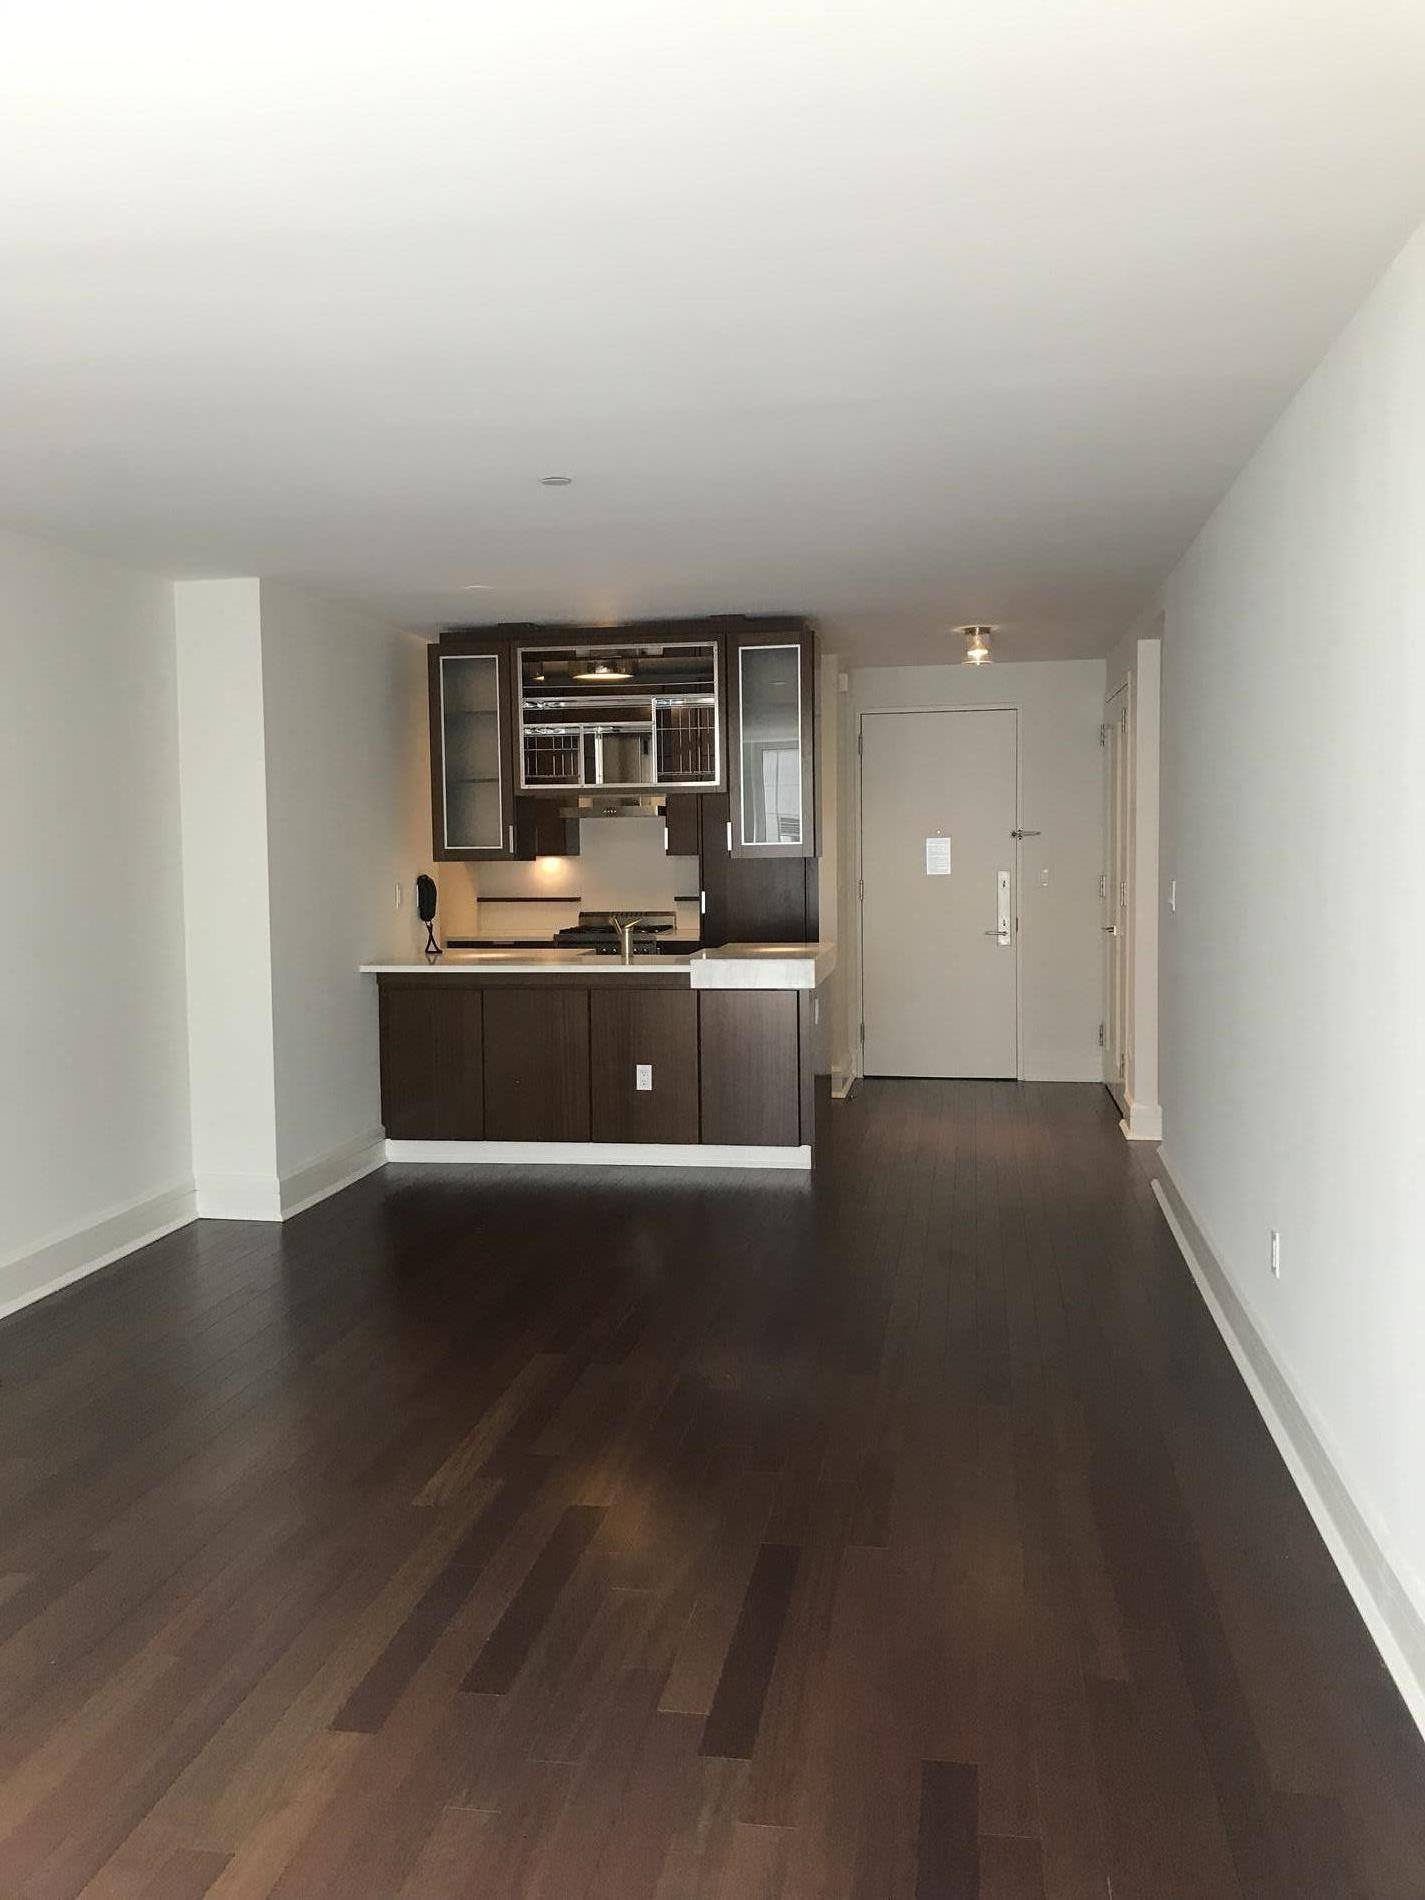 One Bedroom Unit Near Lincoln Center With Central Air & High Ceilings